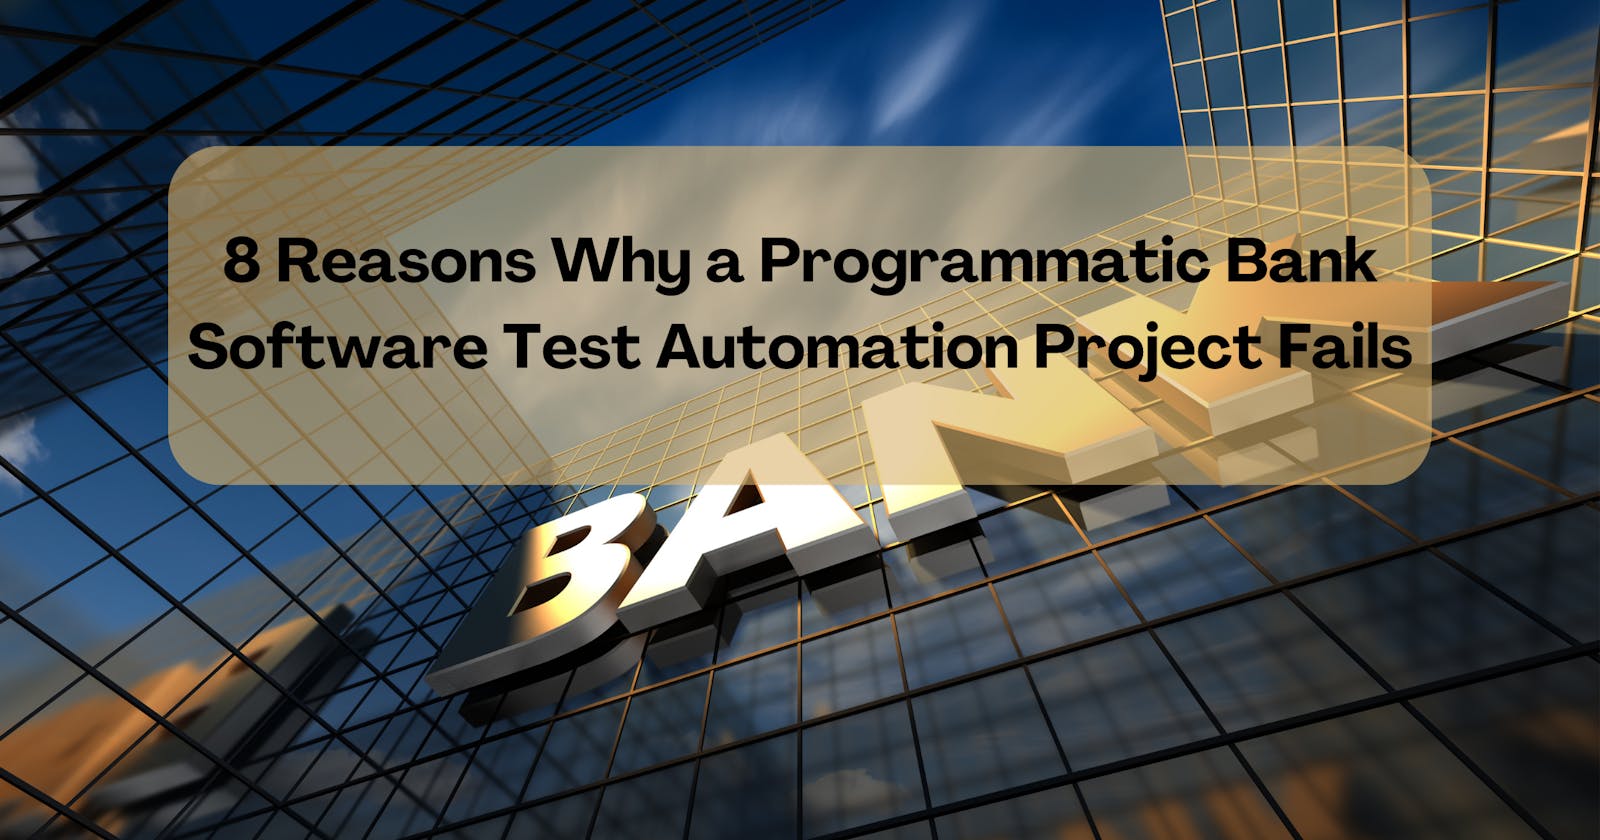 8 reasons why a Programmatic Bank Software Test Automation Project fails